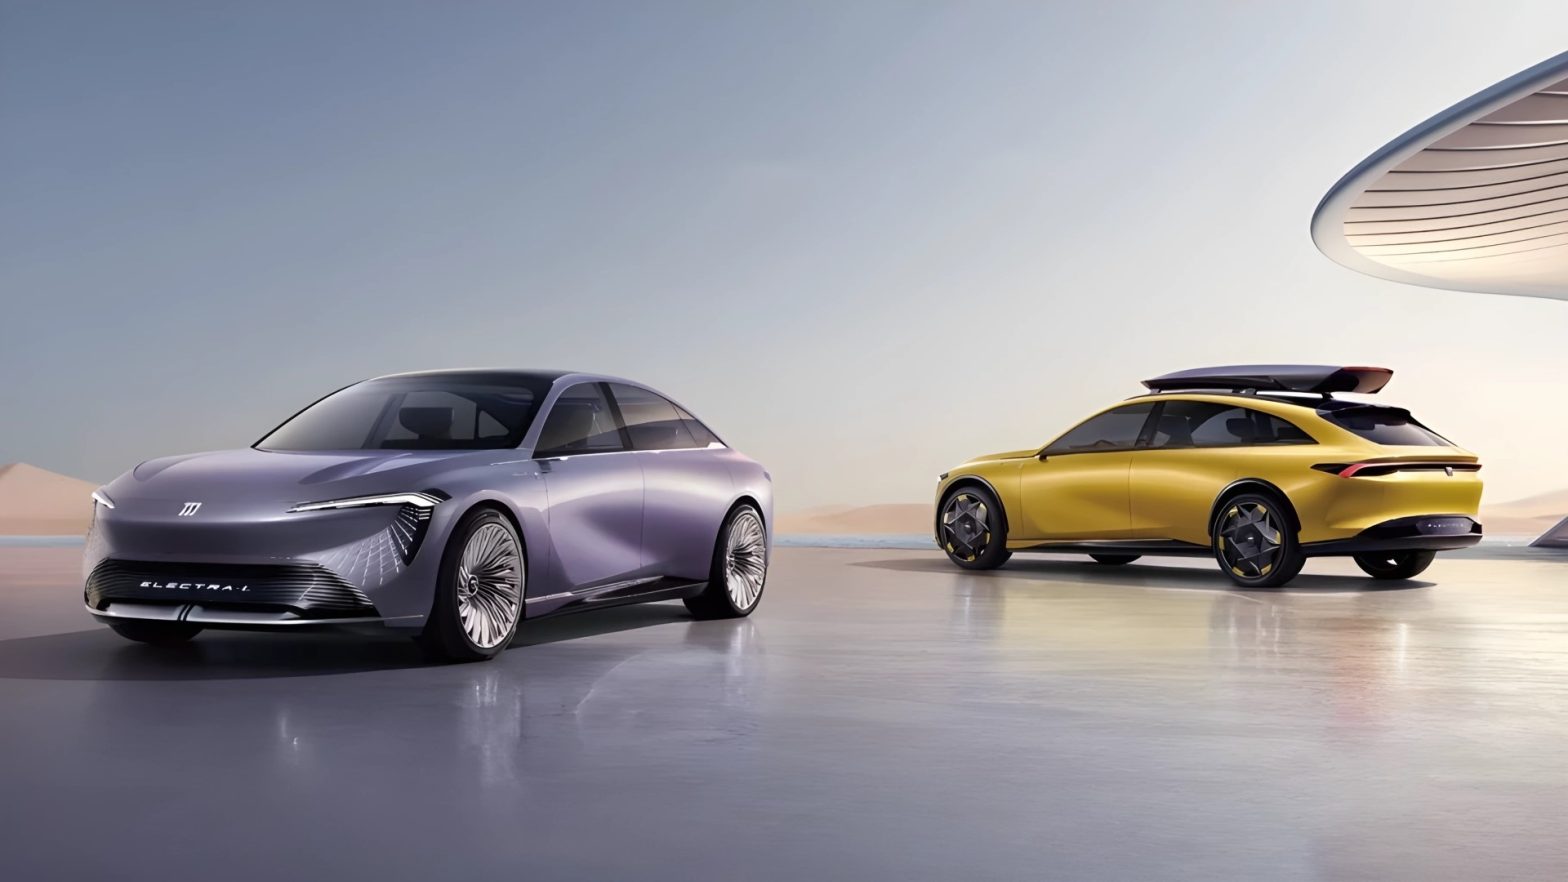 Buick Reveals Electrifying Electra-L Sedan And Electra-LT Wagon Concepts At The 2024 Beijing Auto Show